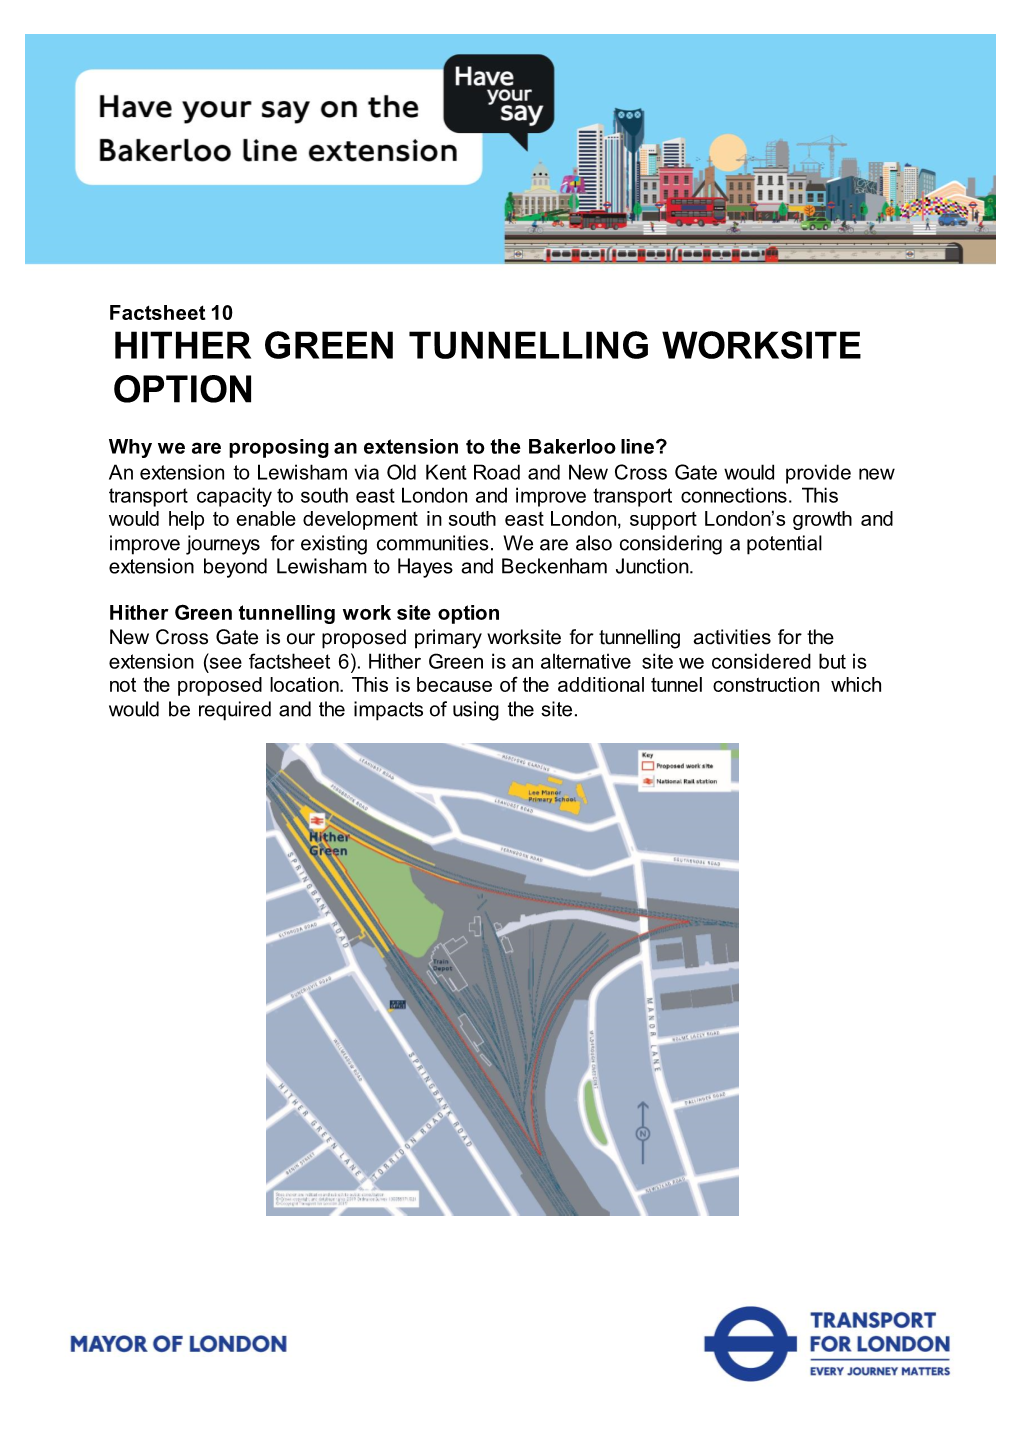 Factsheet 10. Hither Green Tunnelling Worksite Option